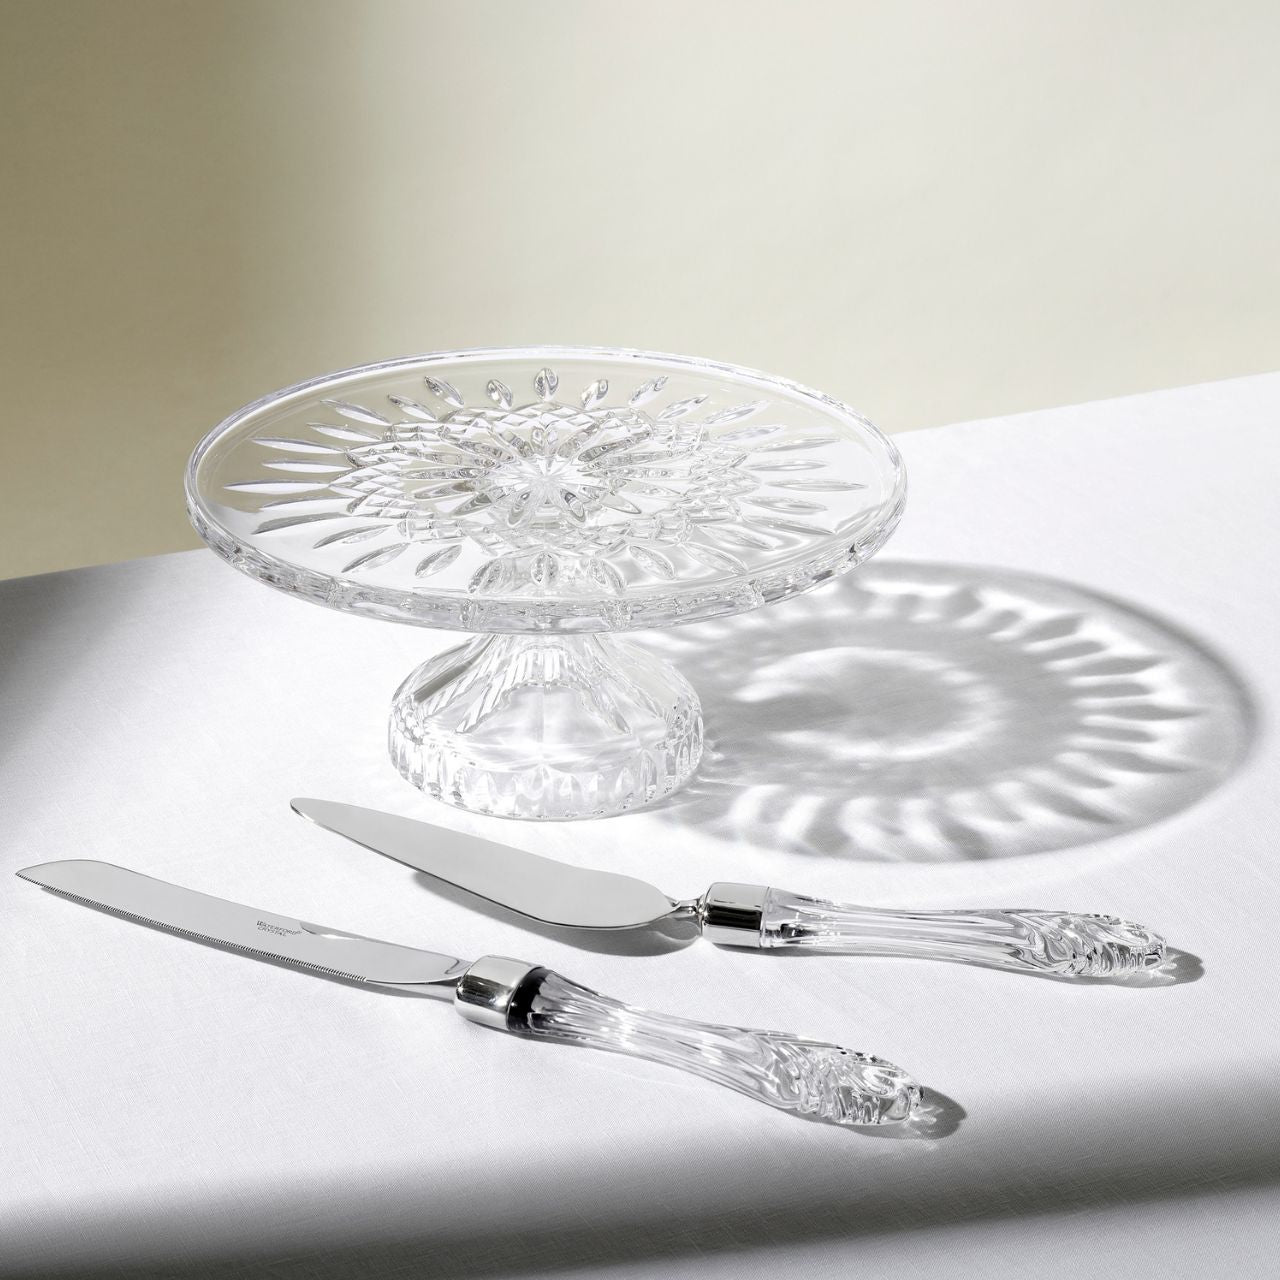 Lismore Cake Plate - Footed by Waterford Crystal  Featuring the iconic Lismore pattern, the Lismore Gift Bar Collection is inspired by the rich heritage of Ireland with pieces designed to be used and enjoyed. The Lismore Cake Plate 11 inch is perfect for serving up delicious cakes, sandwiches and biscuits. Lismore's signature diamond and wedge cuts create a brilliance and clarity that turns ordinary presentations into a special event.